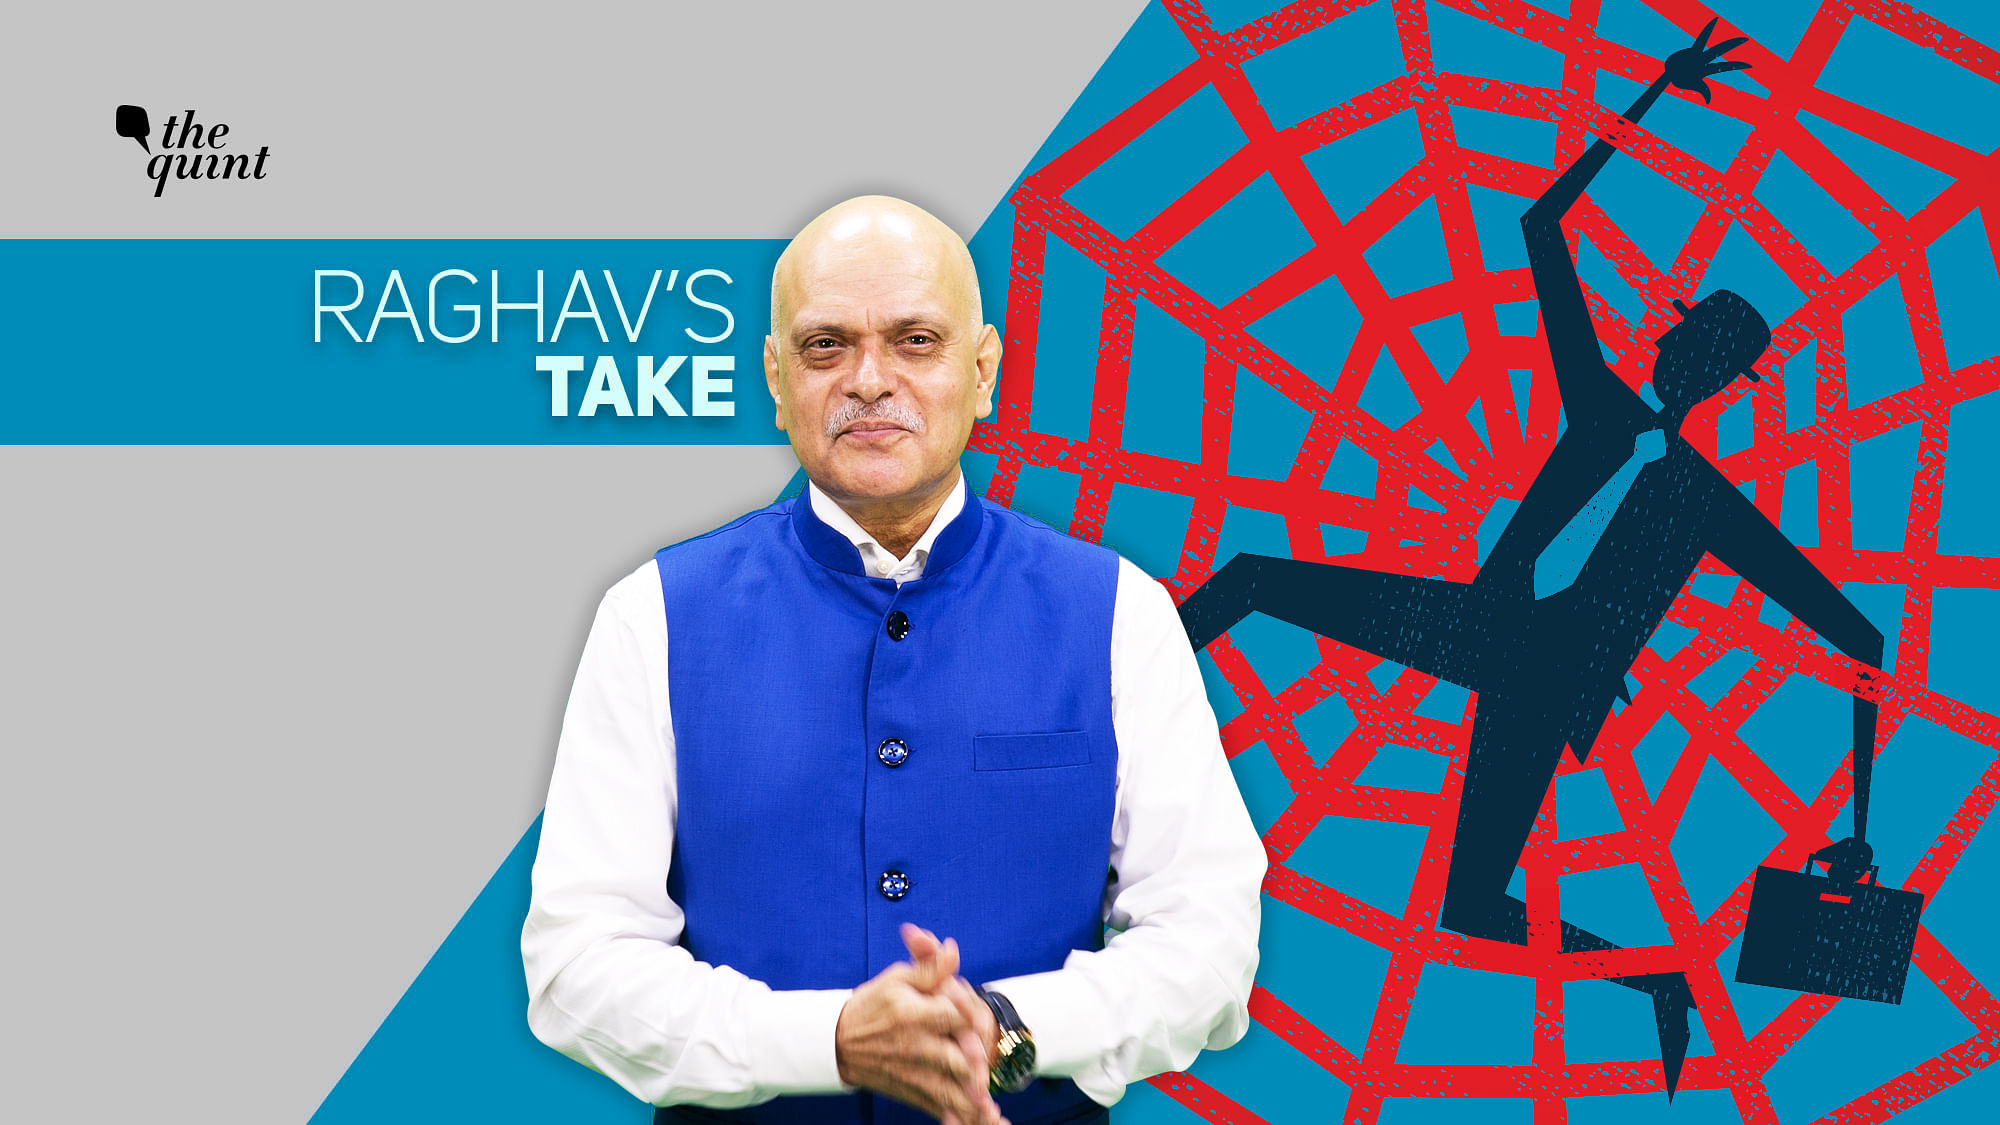 Image of ‘bureaucratic cobweb’ and The Quint’s founder-editor, Raghav Bahl, used for representational purposes.